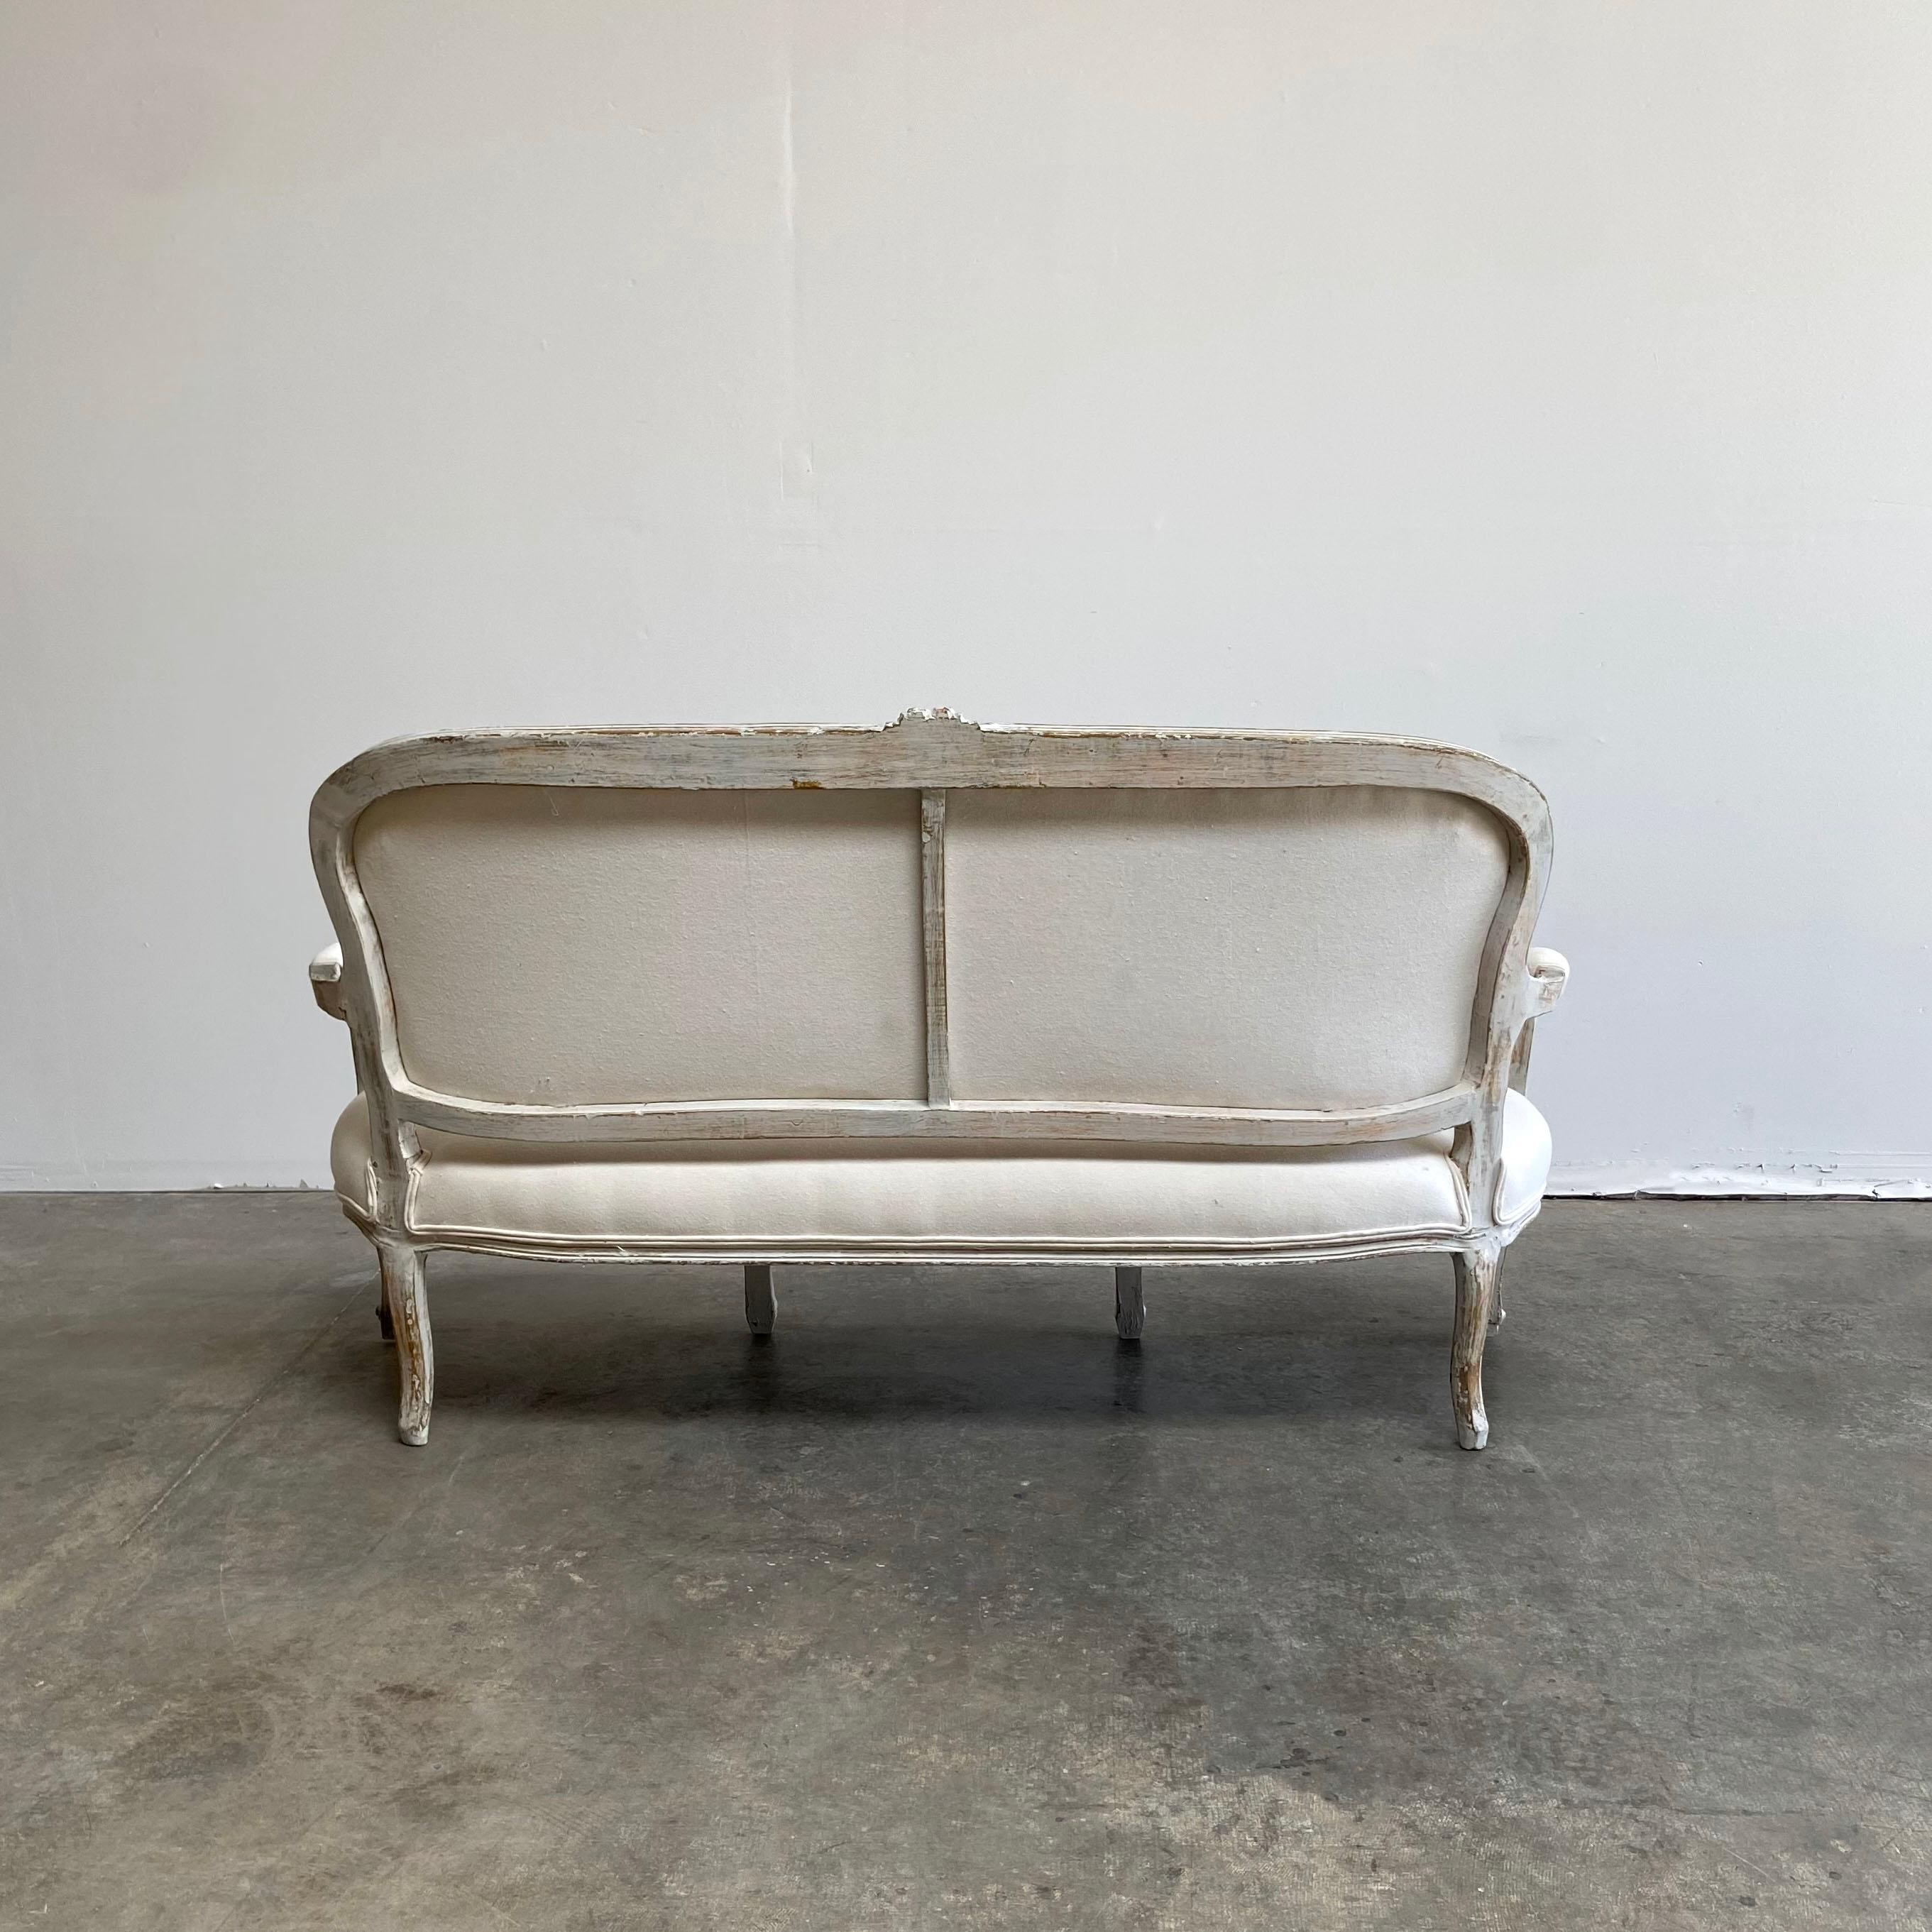 Vintage painted and upholstered Louis XV style open arm sofa settee painted in a French gray with subtle distressed edges, where gilt and wood show through.
Classic Louis XV legs, with a large rose and flower carving at the top back of the sofa.